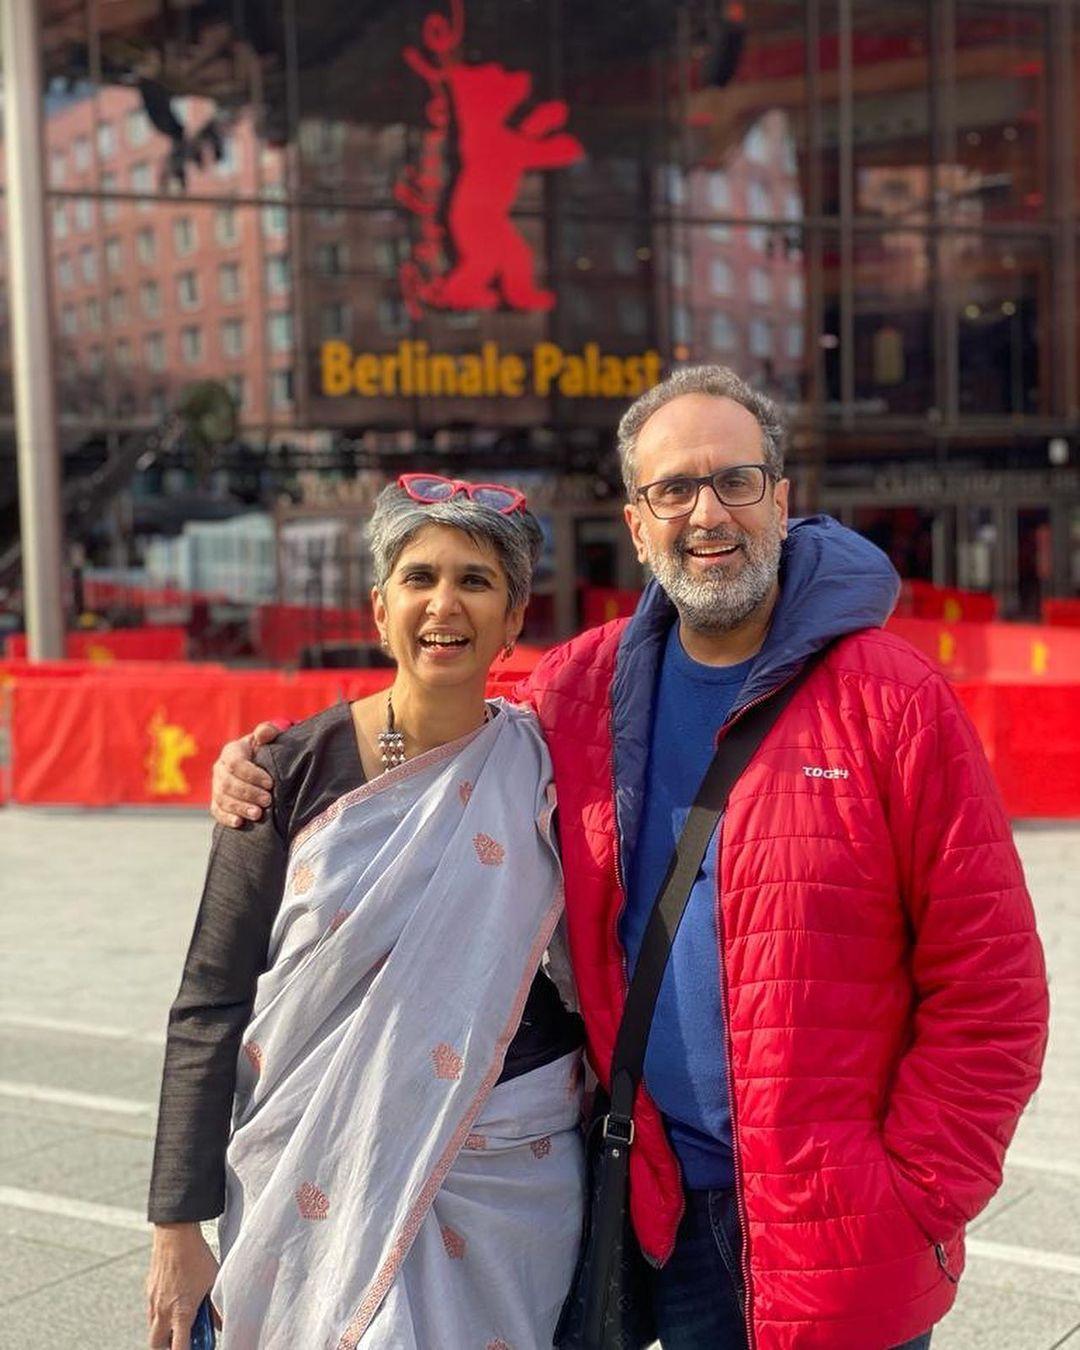 class="content__text"
 Henry Ford said Anyone who stops learning is old, whether at twenty or eighty. Anyone who keeps learning stays young. And #berlinfilmfestival proved it for me. What a learning !!!! Thank you @meenakshishedde@ashishbende #pareshmokashi @shariq_patel@kanupriyaaiyer@neejudge #berlinale @aatmapamphlet_film 💛💛💛 
 